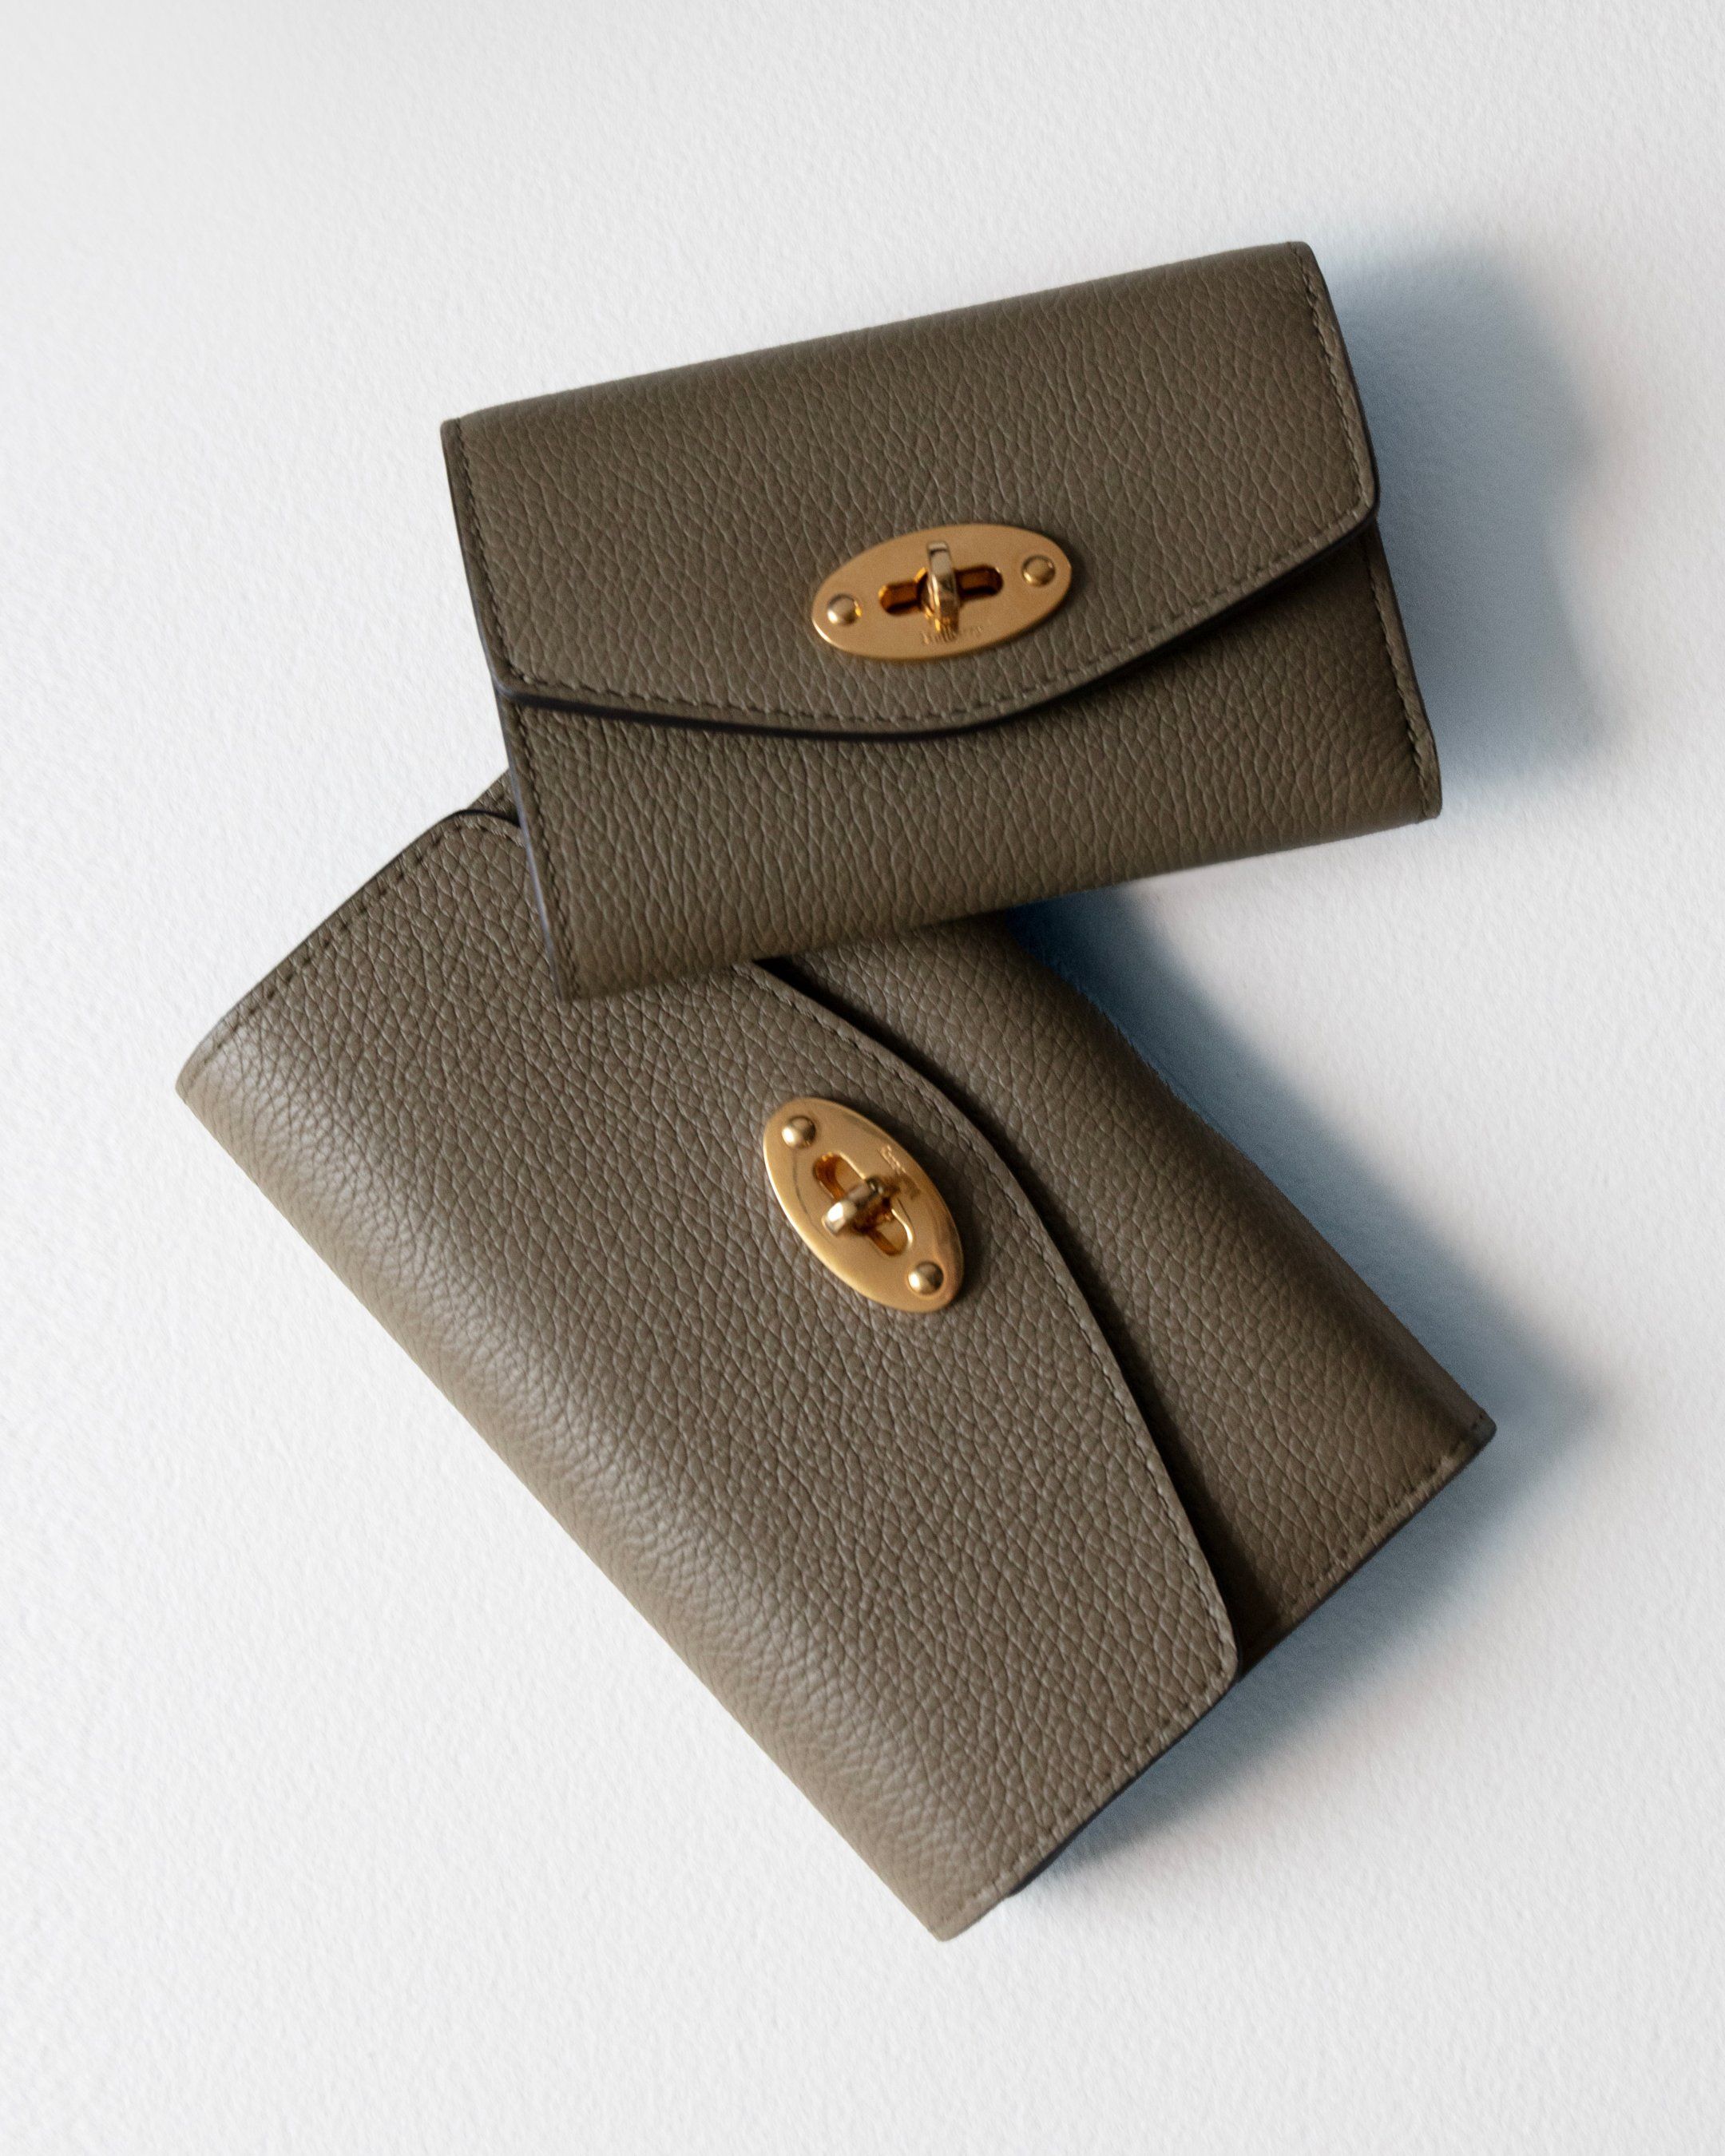 Two Mulberry Darley wallets in linen green leather